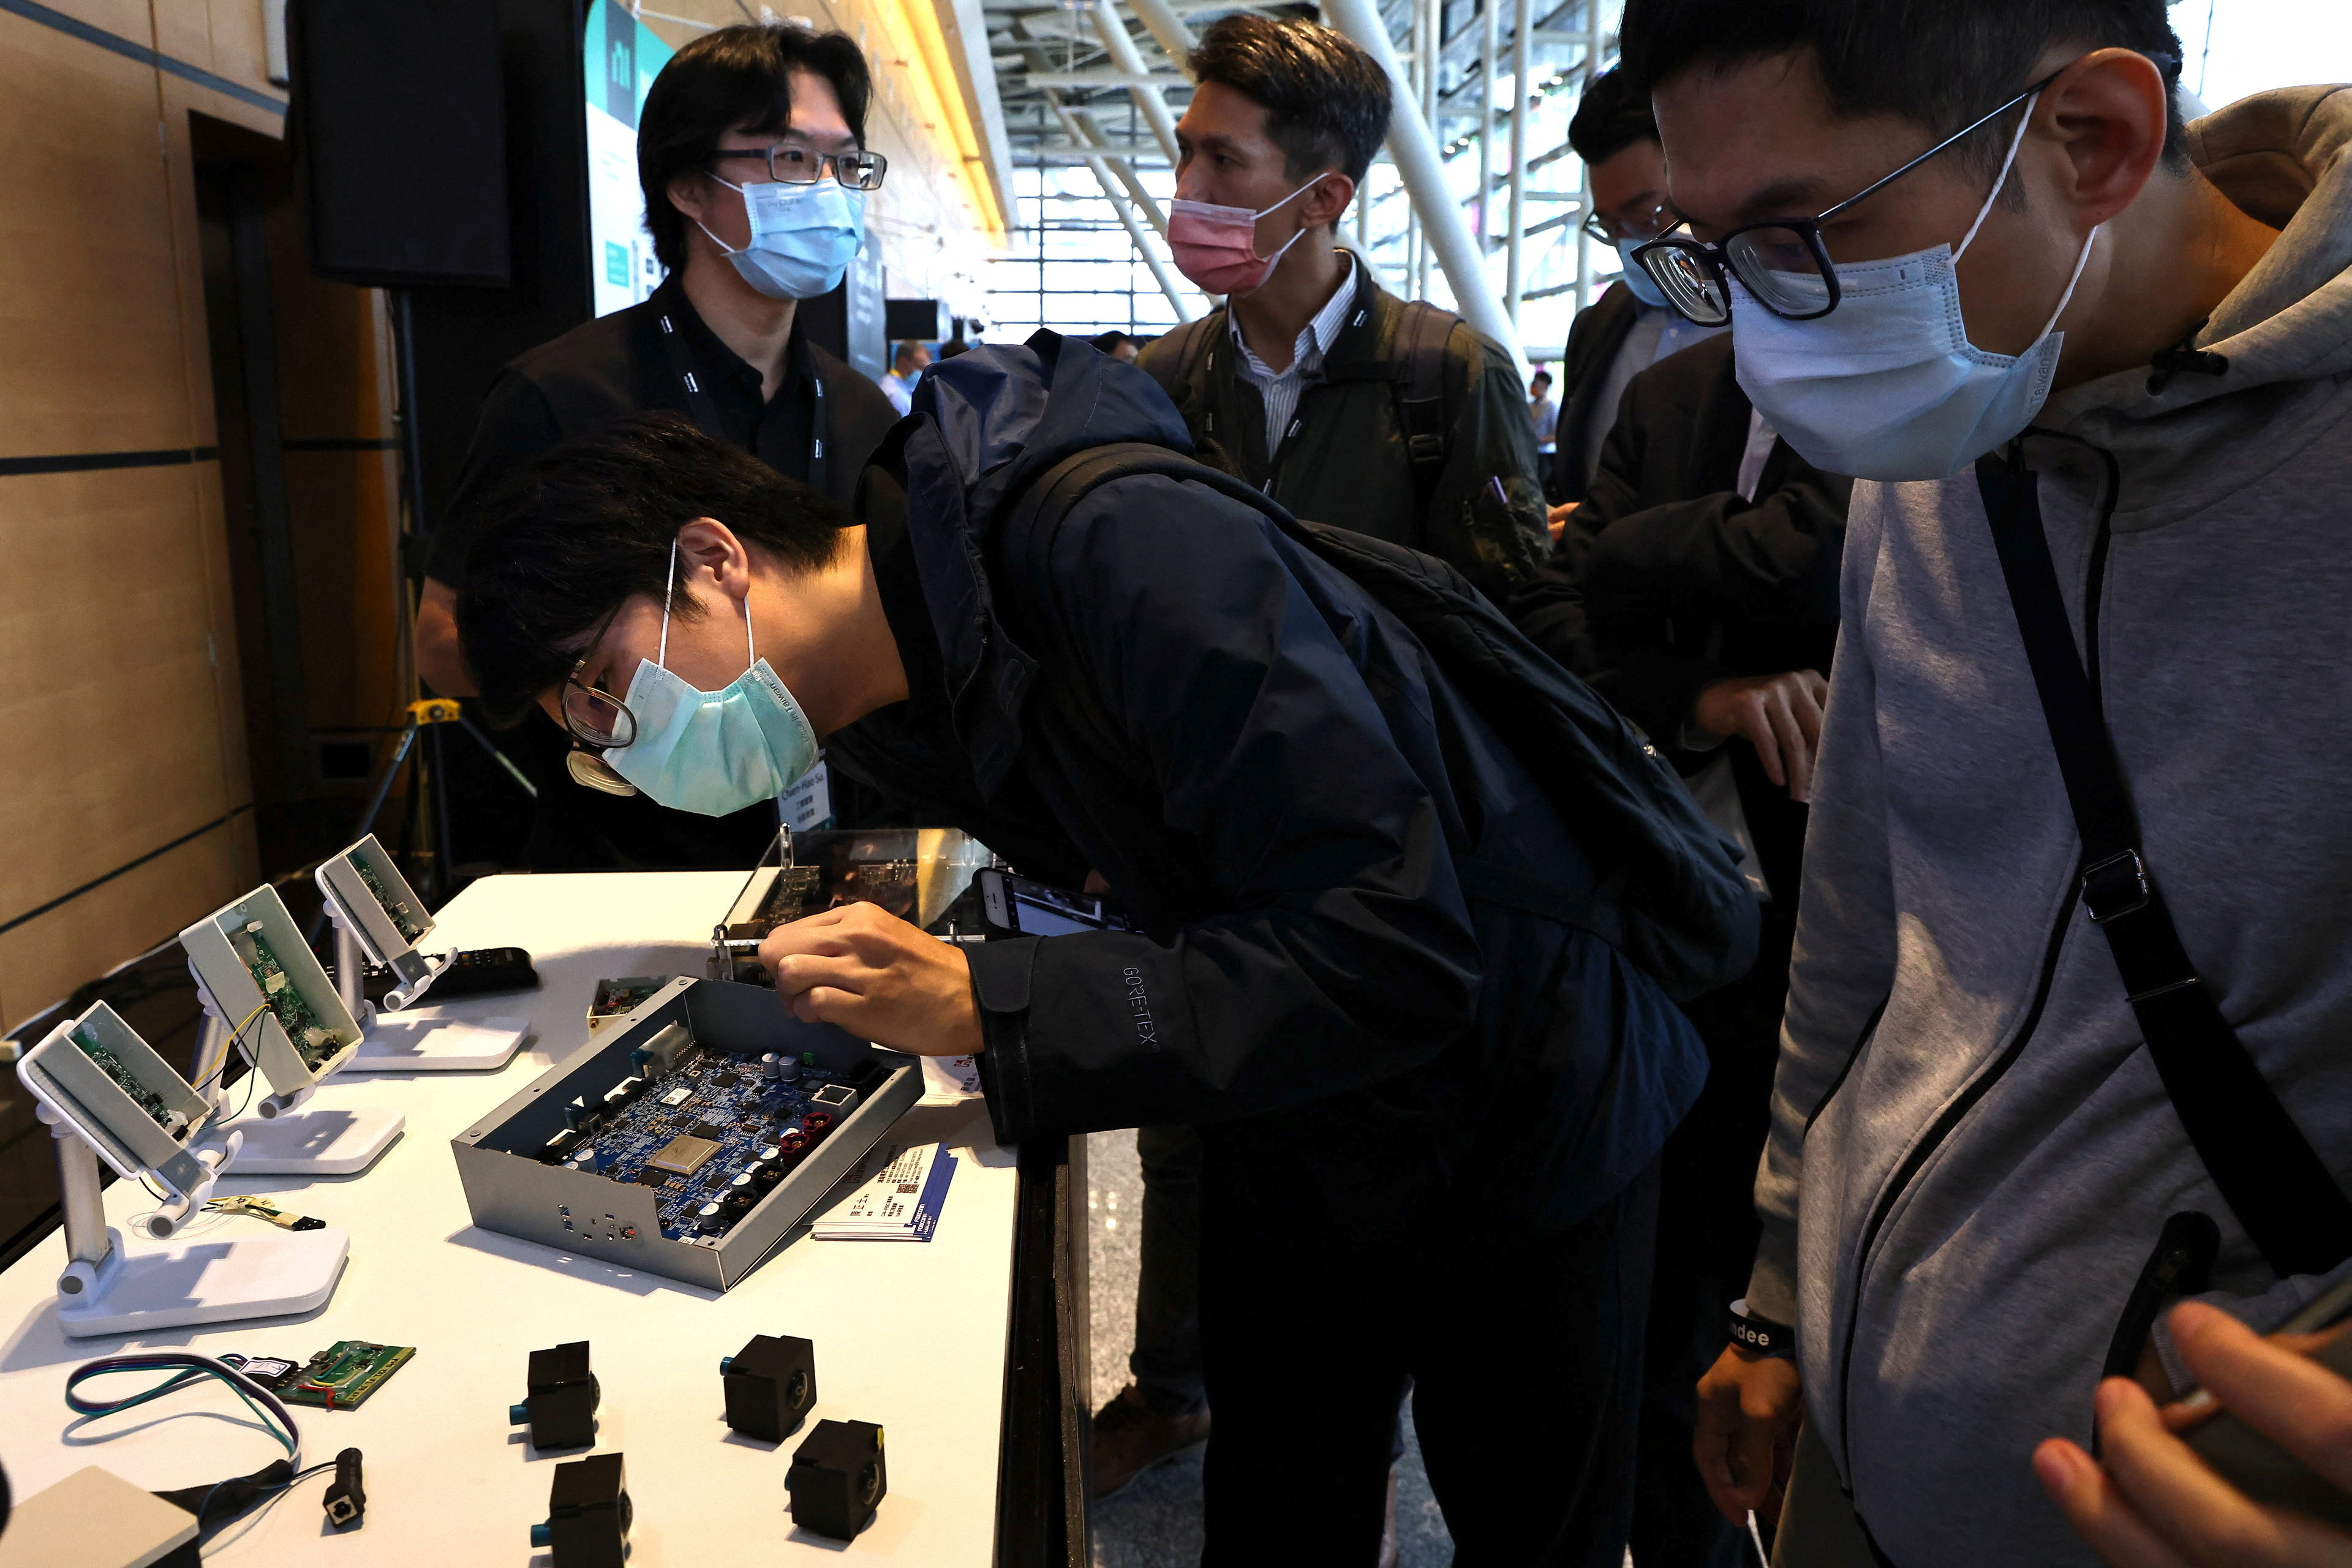 A person examines components used in electric vehicle at the Foxconn's EV development platform MIH demo day, in Taipei